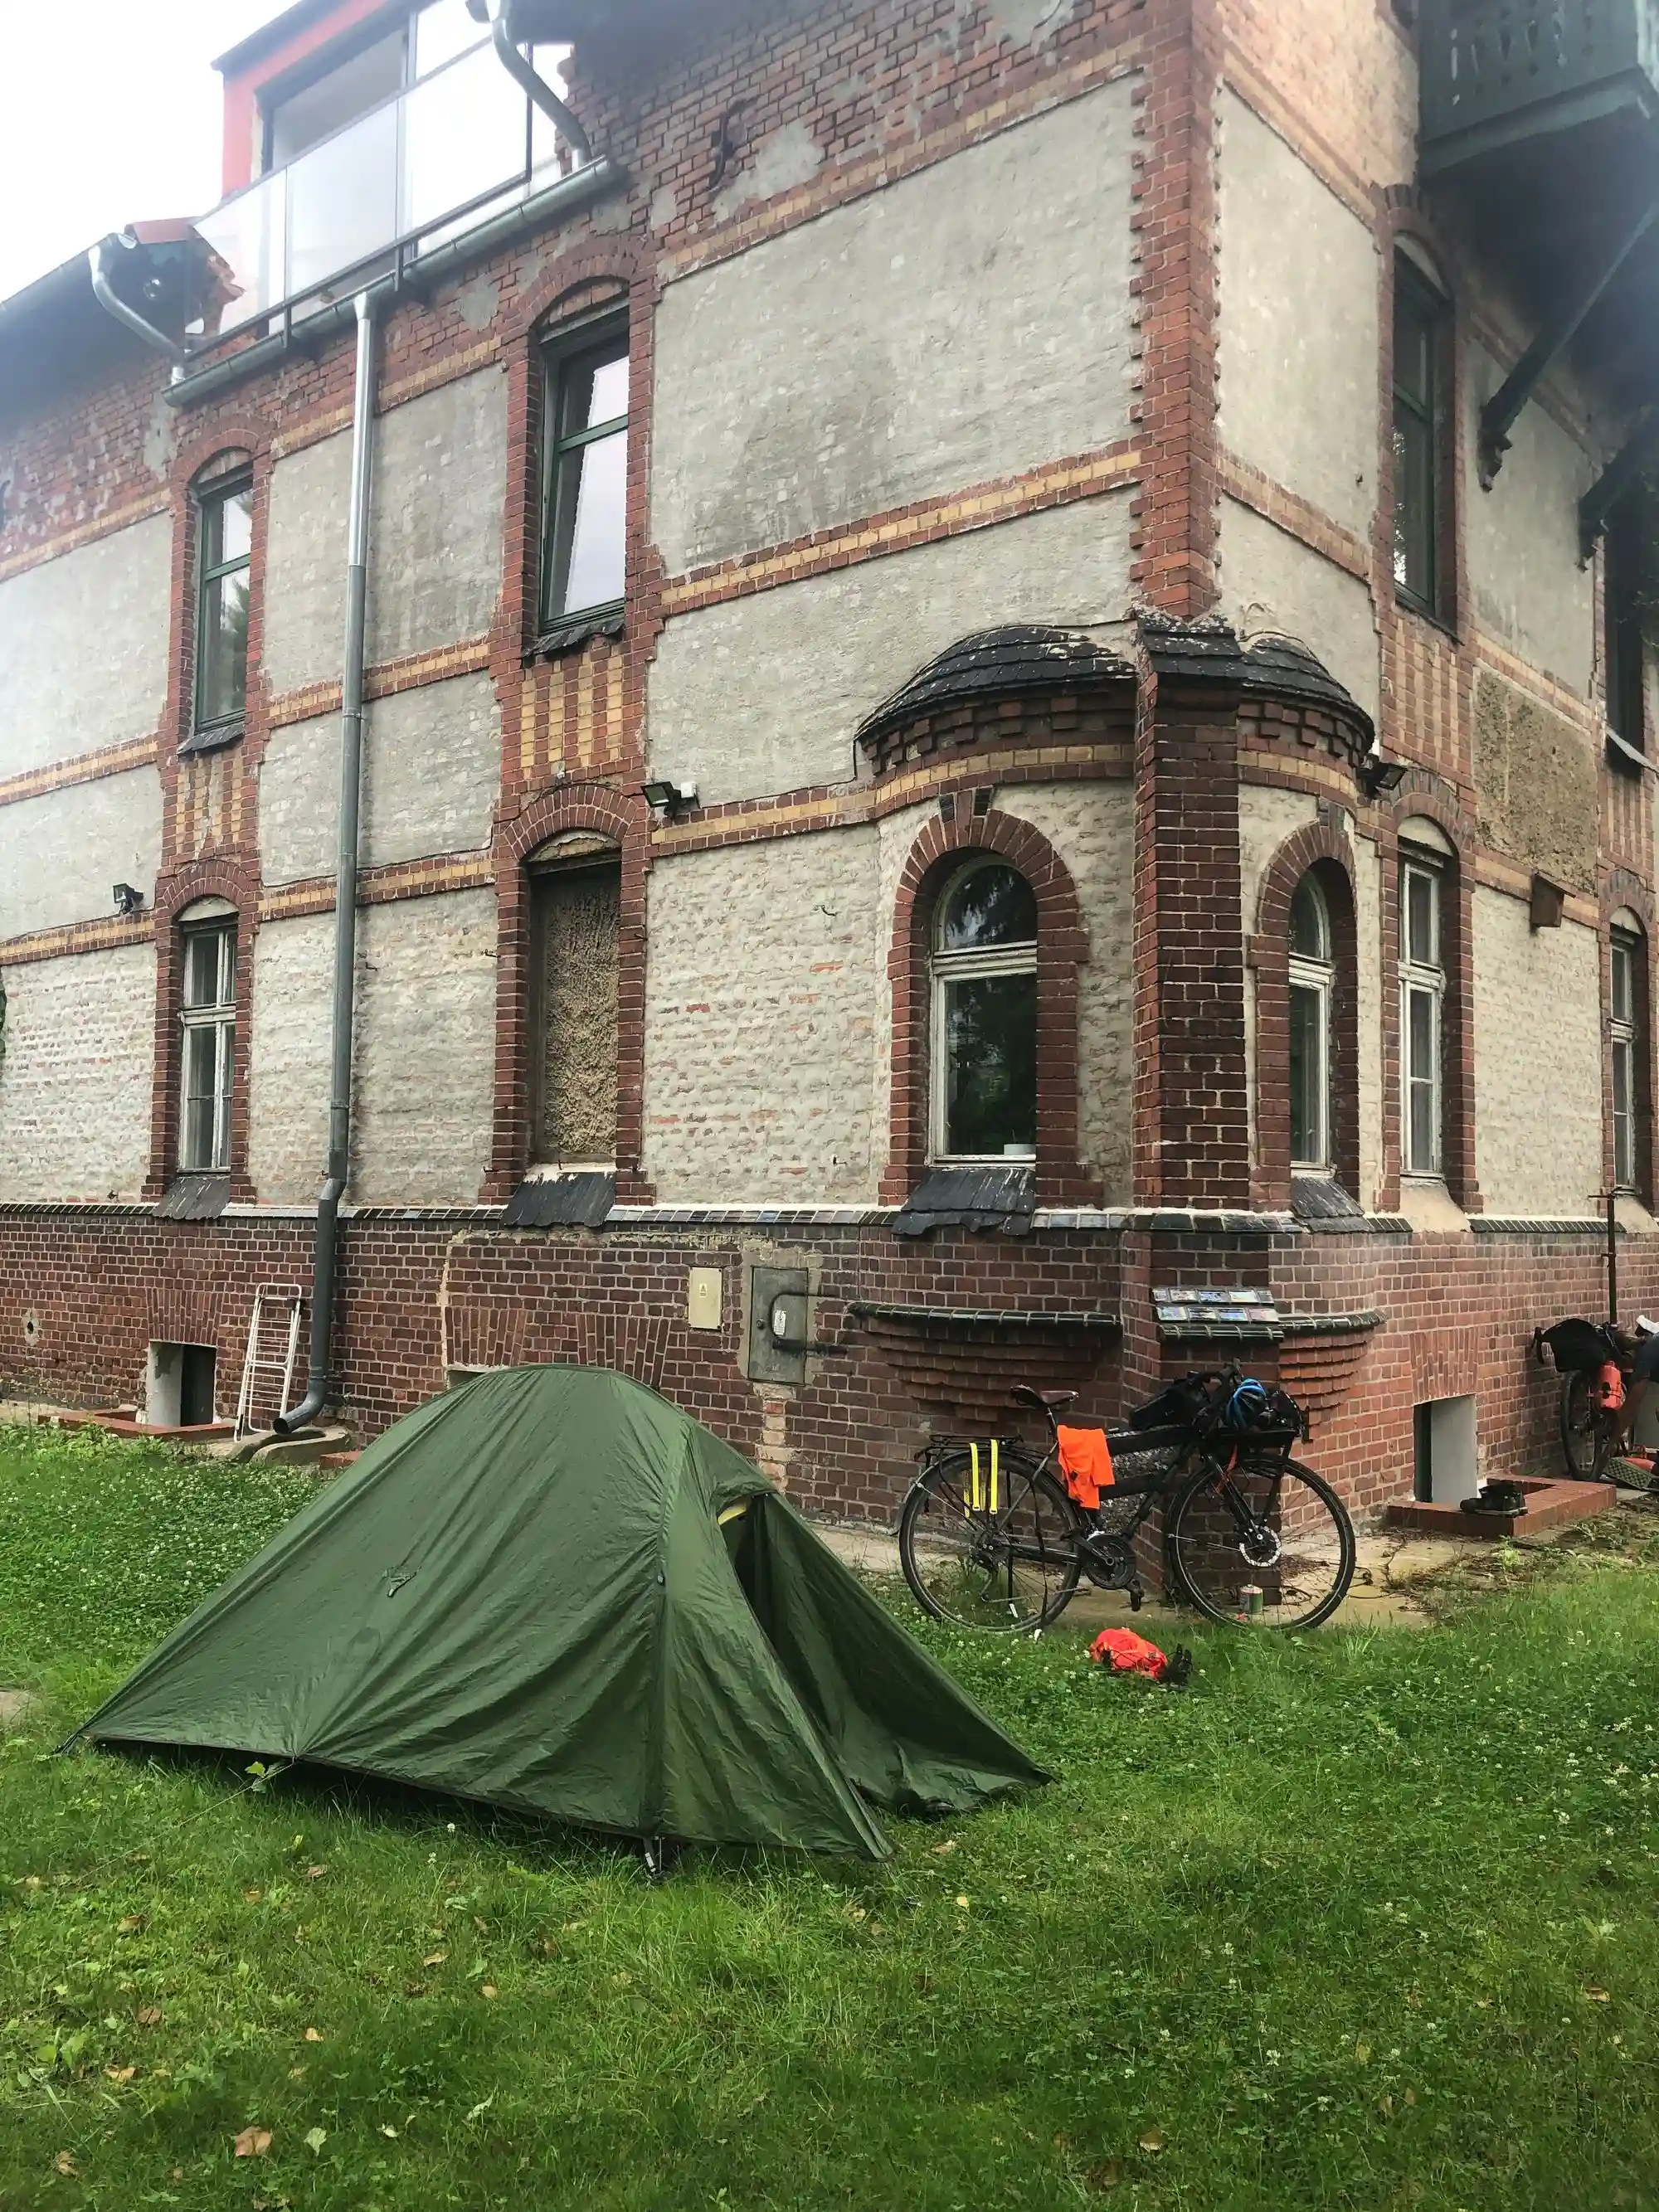 My Introduction to bikepacking (part 6) - Easing in with the flats